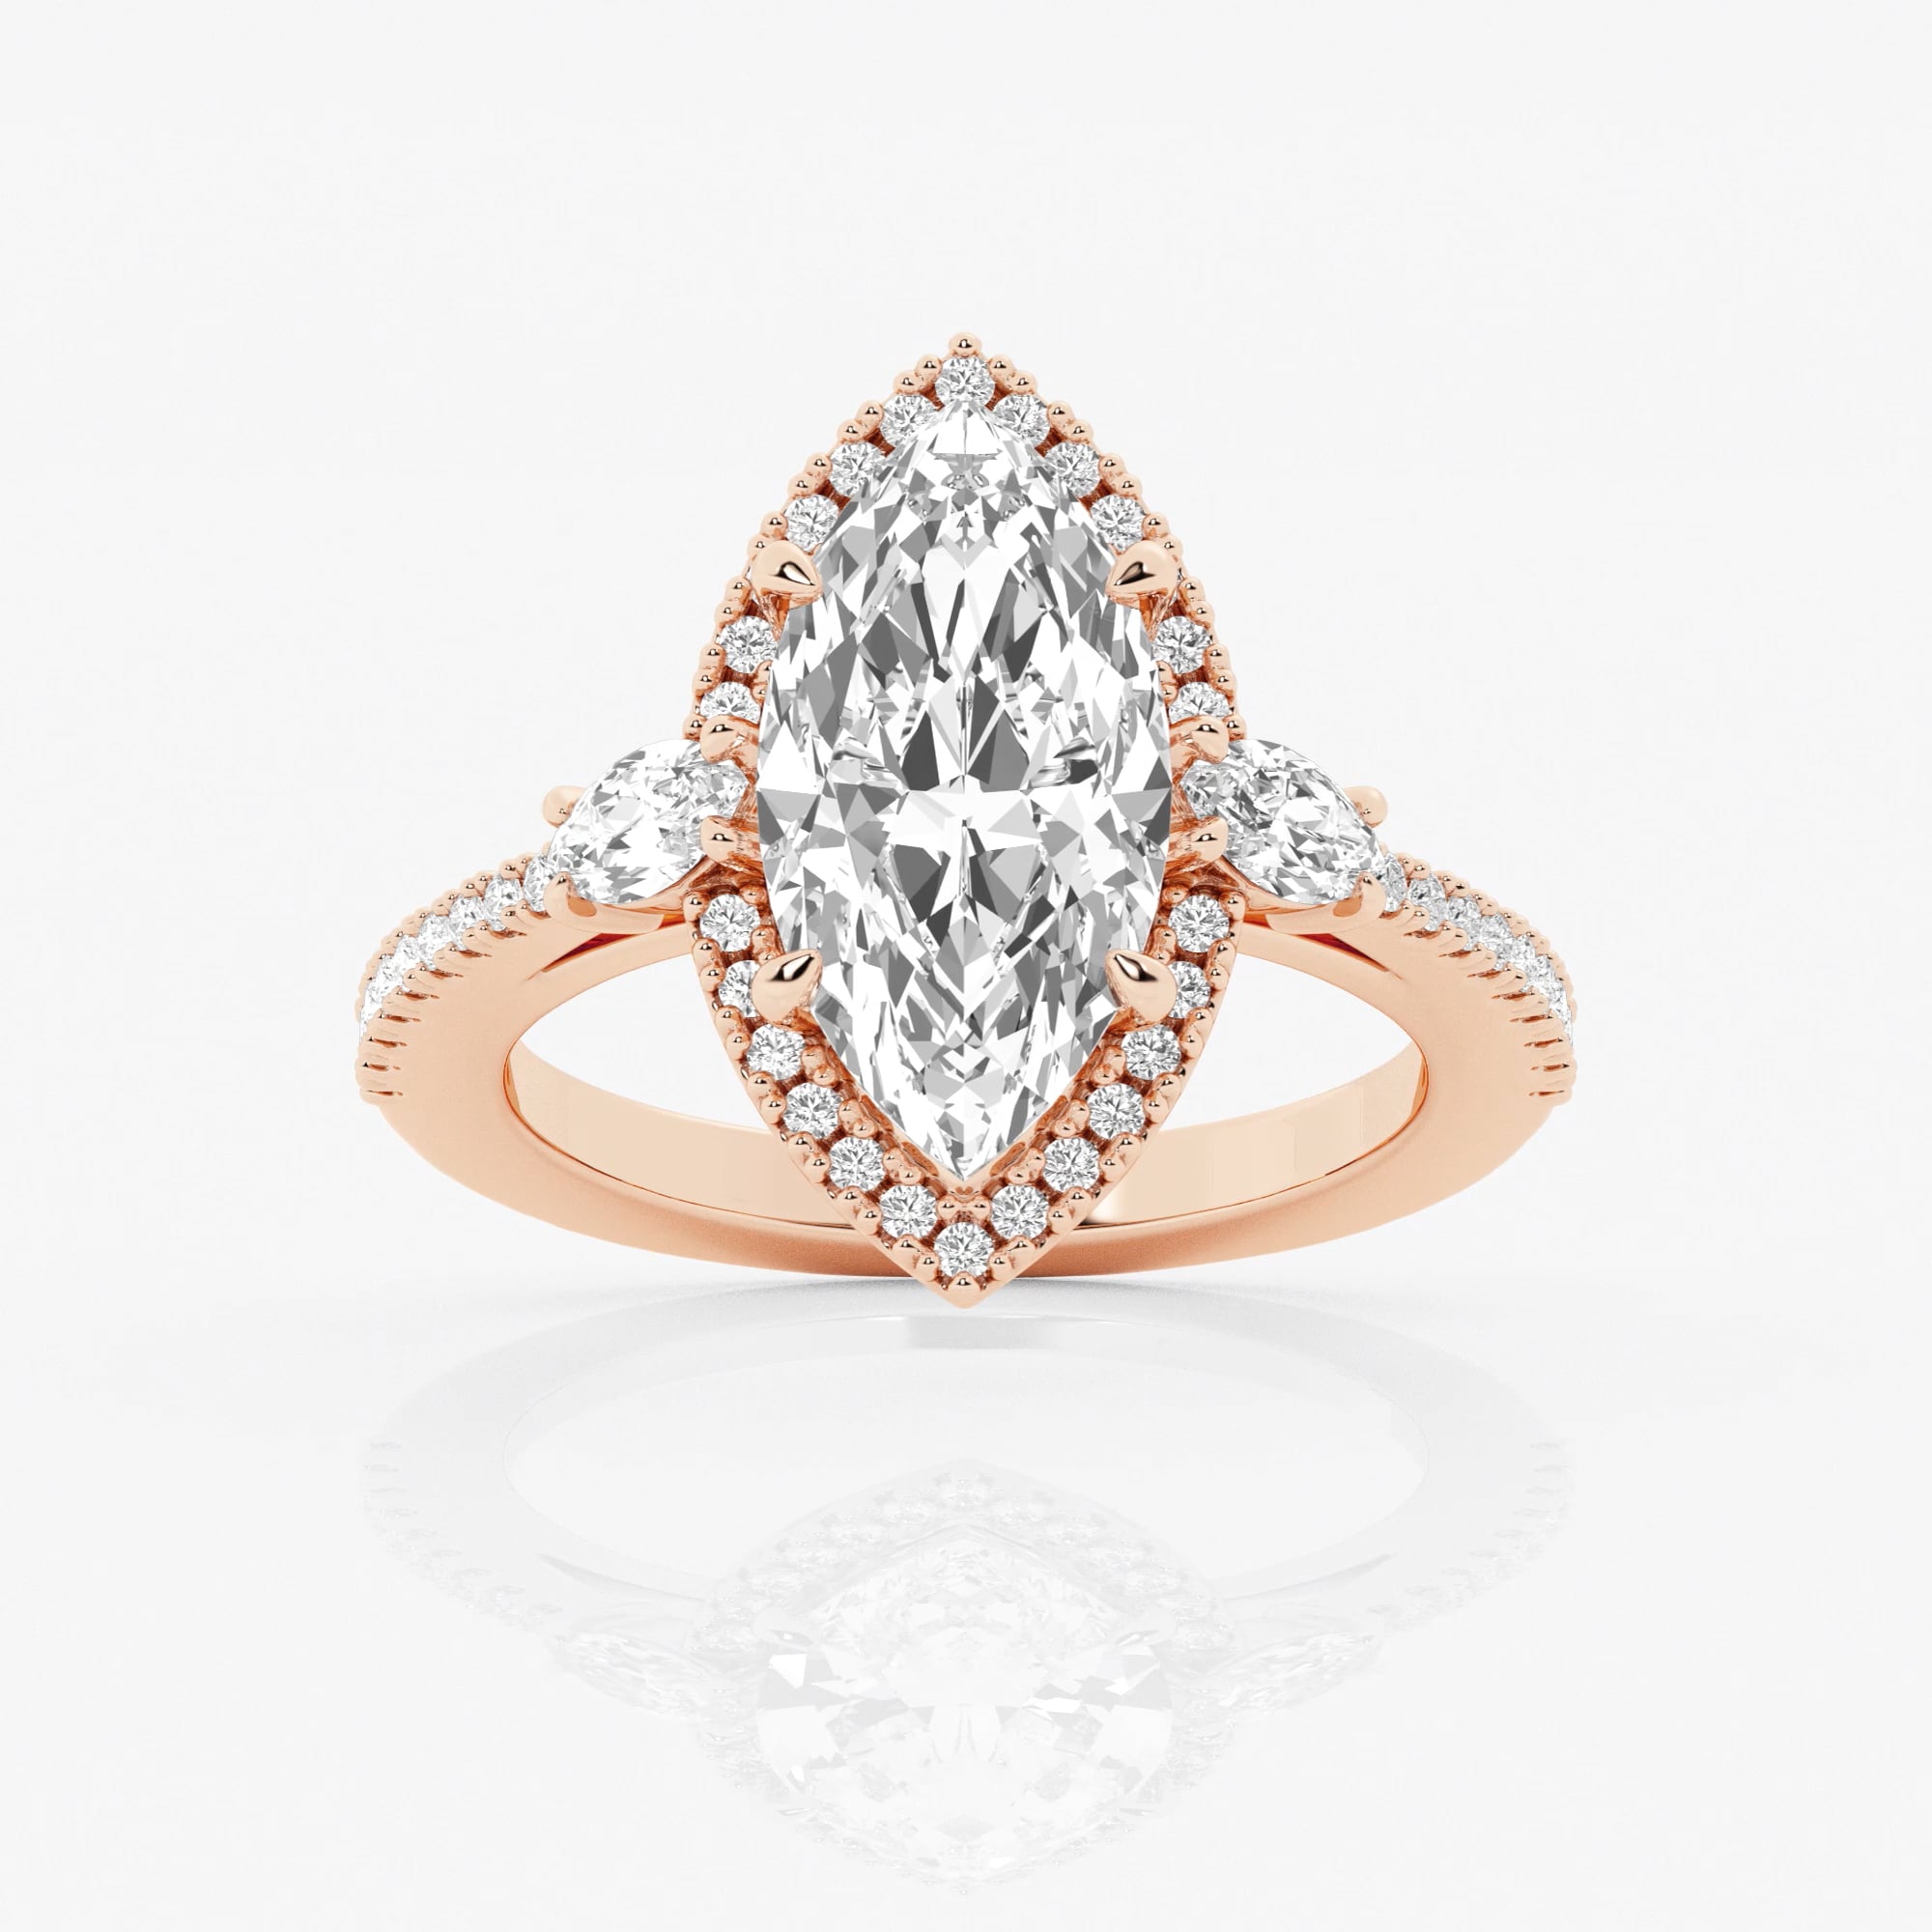 Badgley Mischka Near-Colorless 4 7/8 ctw Marquise Lab Grown Diamond Halo  Engagement Ring - Grownbrilliance